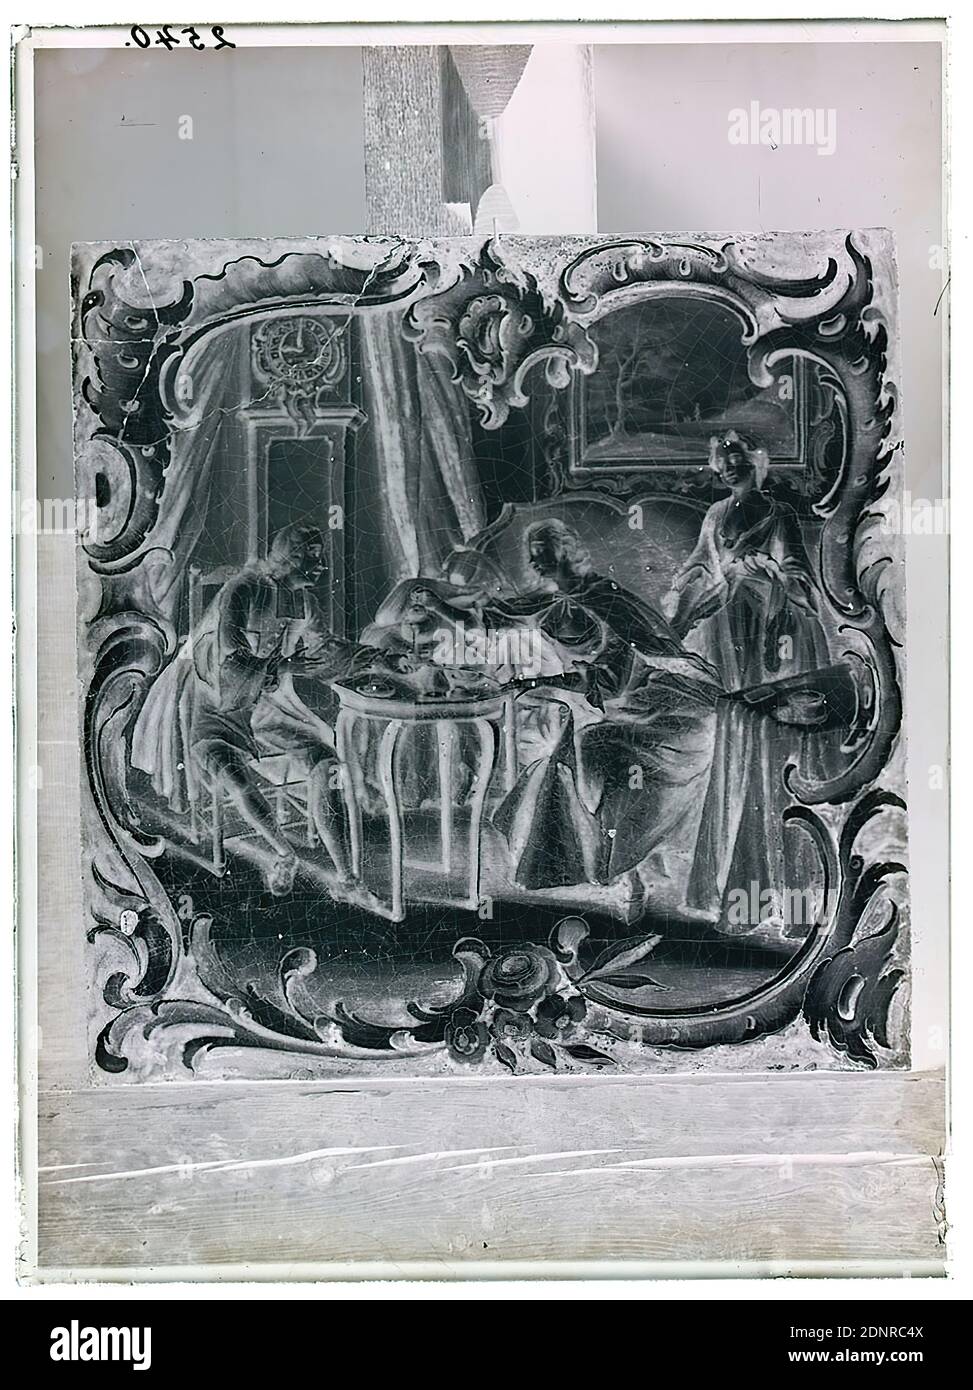 Wilhelm Weimar, tile Le Matin (after Nicolas Lancret), glass negative, black and white negative process, total: height: 23.8 cm; width: 17.8 cm, numbered: top left: in black ink: 2540. works of applied art (ceramics), ornaments, rocaille, tableware, table decoration, teatime, time, clock, man, woman, maid, maid, flower ornaments, relationships between the sexes, arts and crafts, applied arts, industrial design Stock Photo